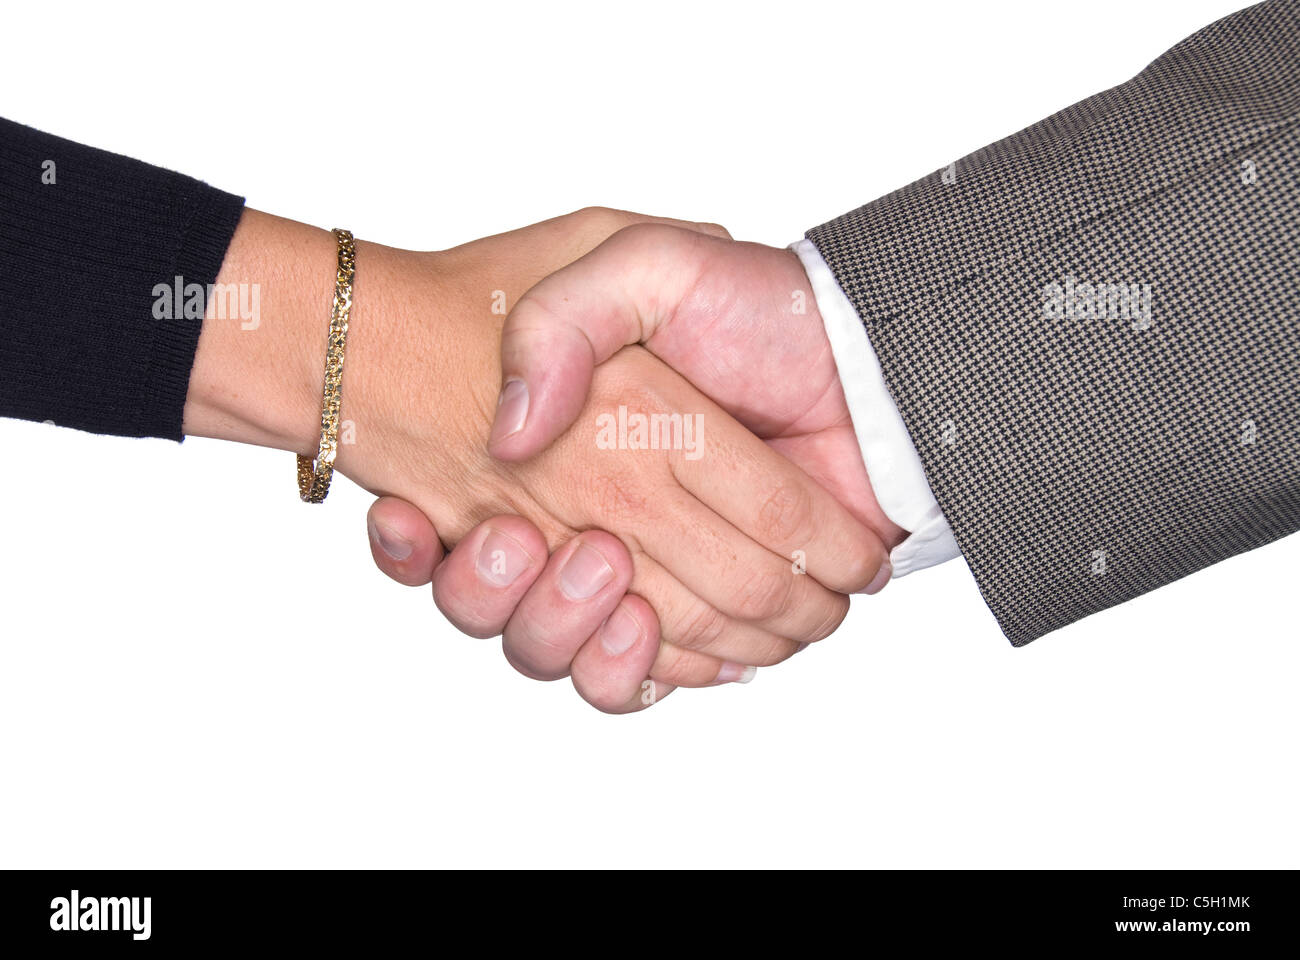 Male and female partners shaking hands after a negotiating a contract agreement Stock Photo